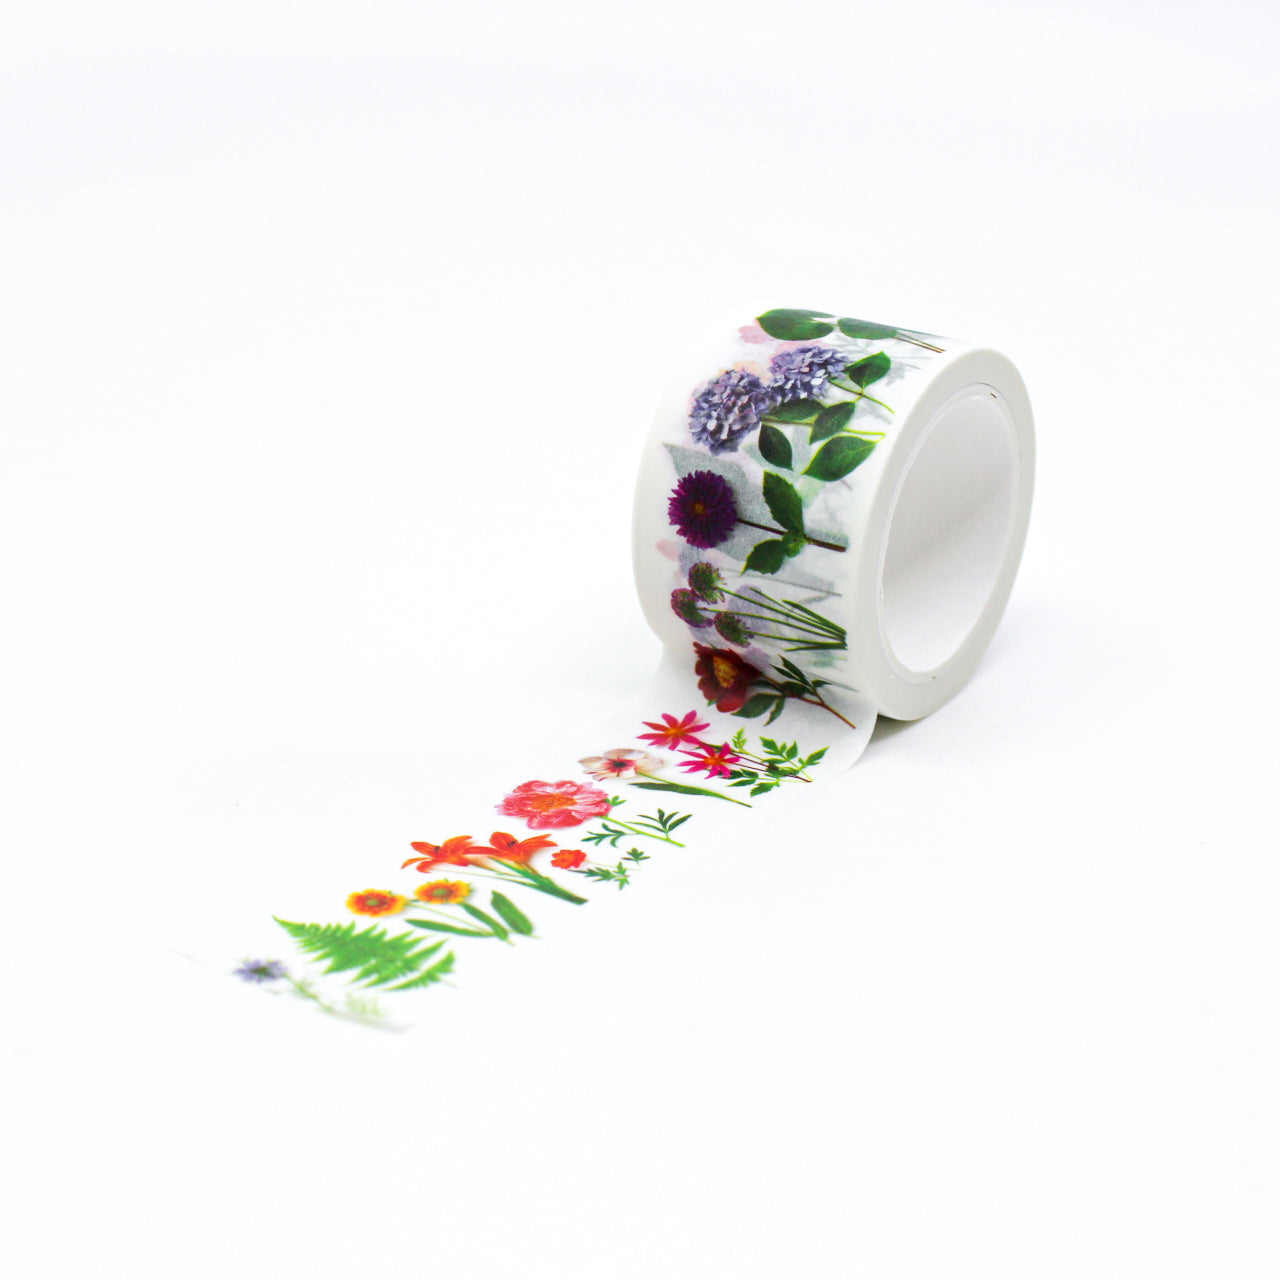 Add a burst of color to your crafts with our vibrant rainbow floral washi tape, featuring a variety of flowers in a spectrum of vibrant hues. Embrace the beauty of nature's palette with our rainbow floral washi tape. This tape is designed by Bottle Branch and sold at BBB Supplies Craft Shop.